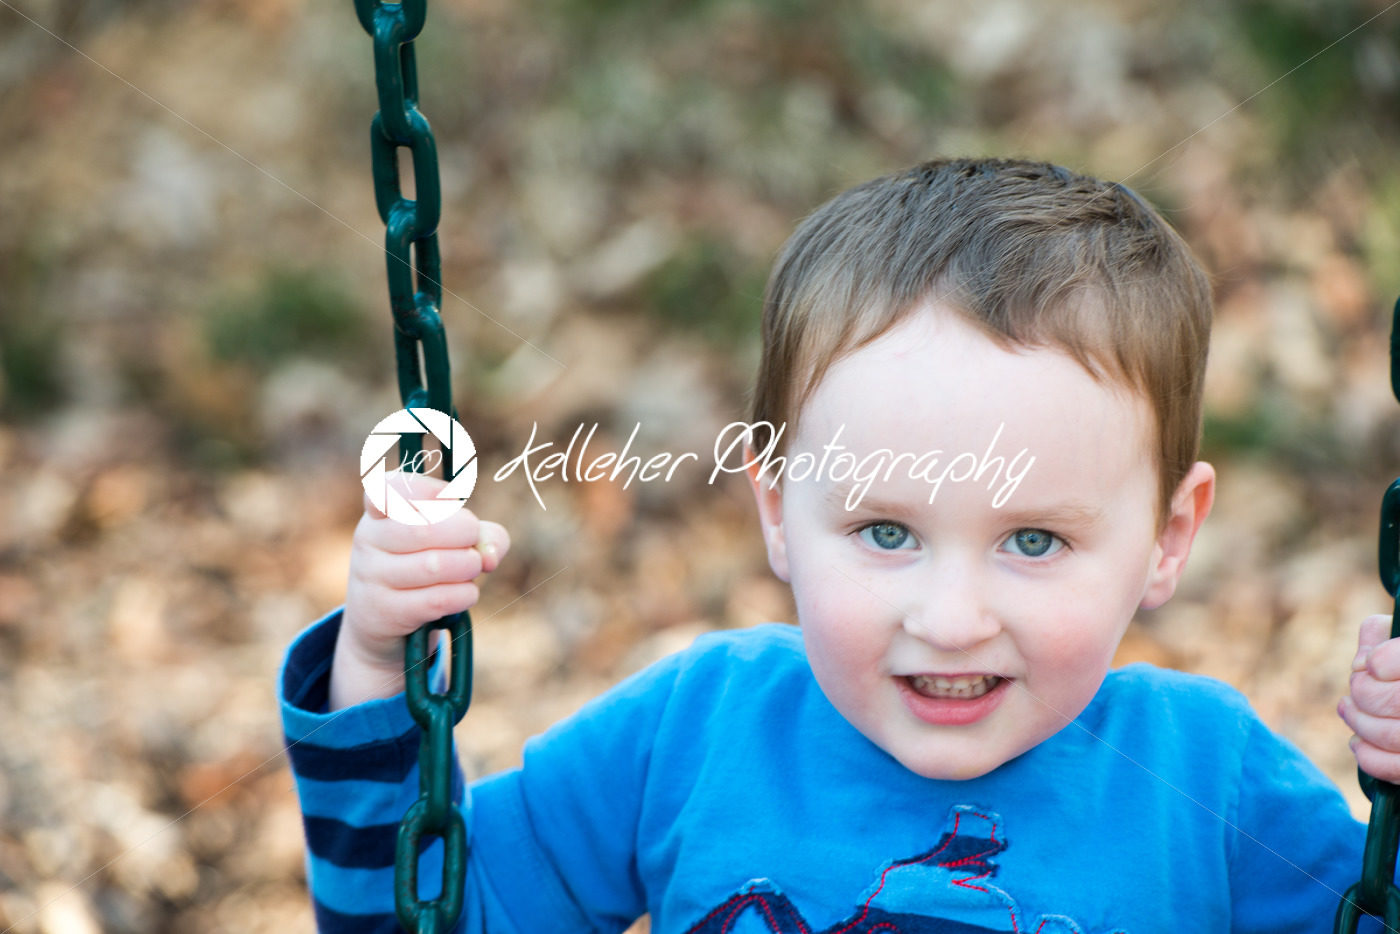 Young boy having fun outside at park on a playground swing set - Kelleher Photography Store